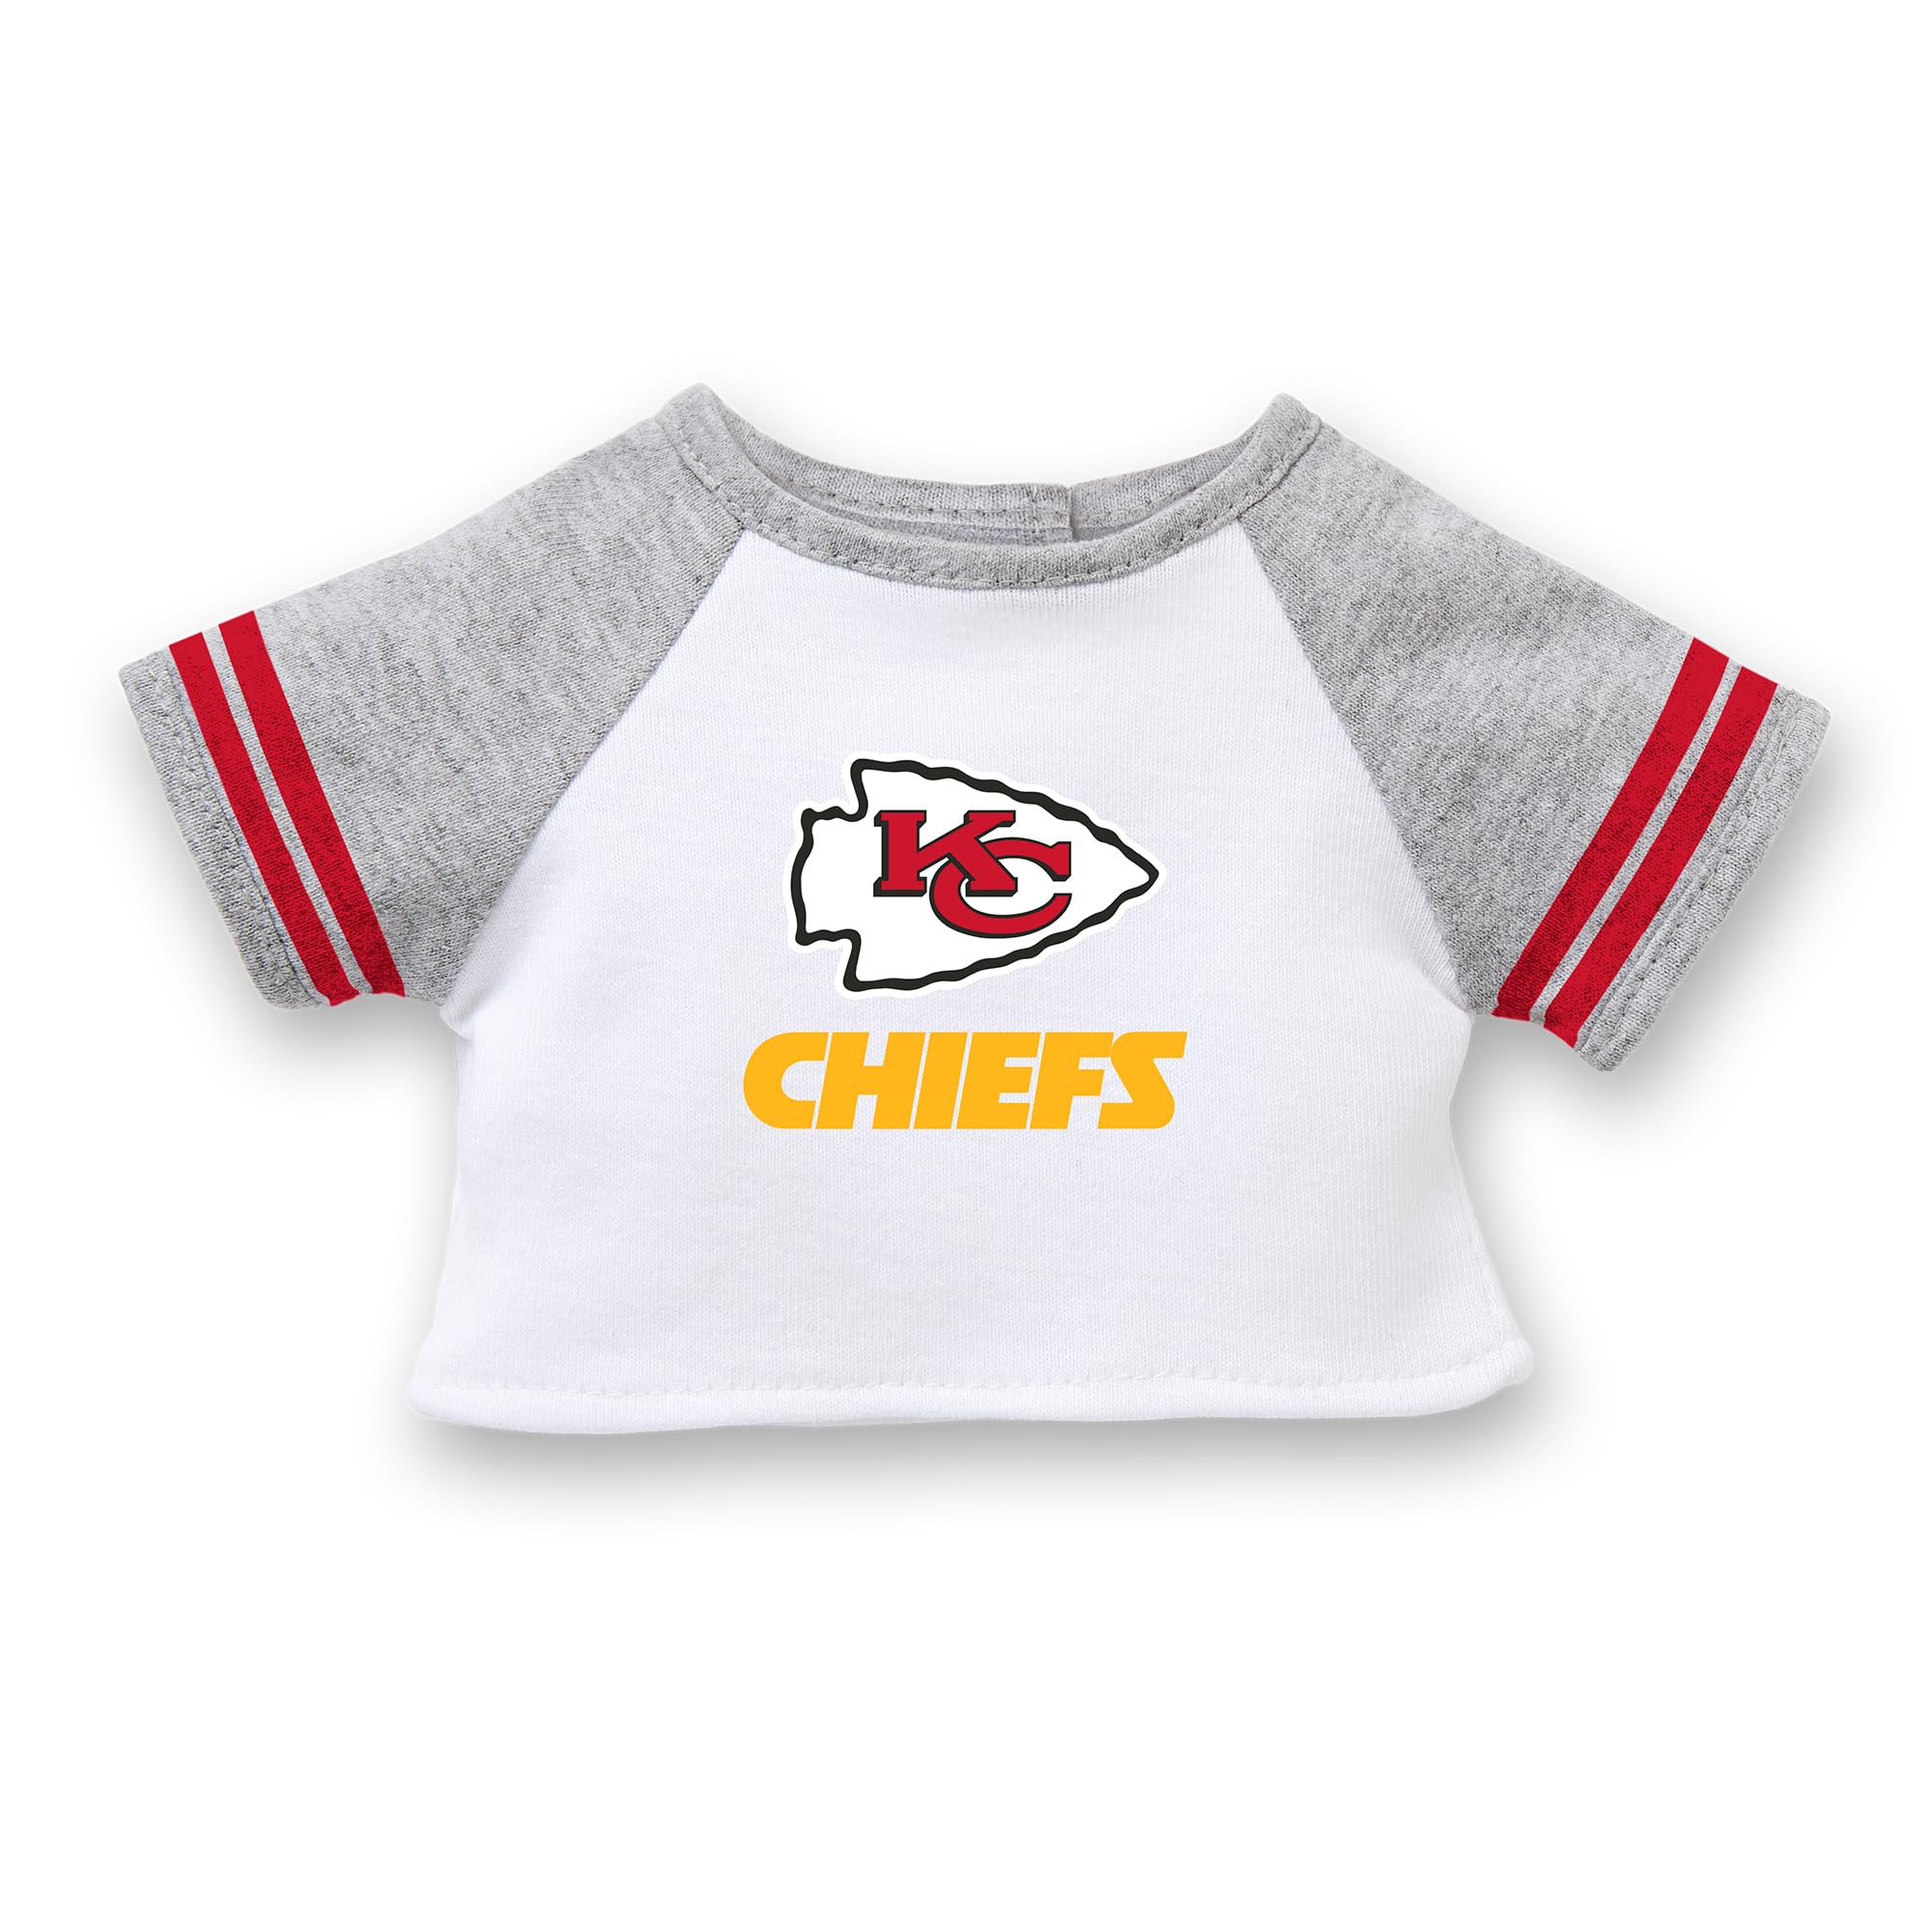 American Girl Kansas City Chiefs 18 inch Fan Tee with Crew Neck Striped Short Sleeve, Red and Gold, 1 pcs, Ages 6+